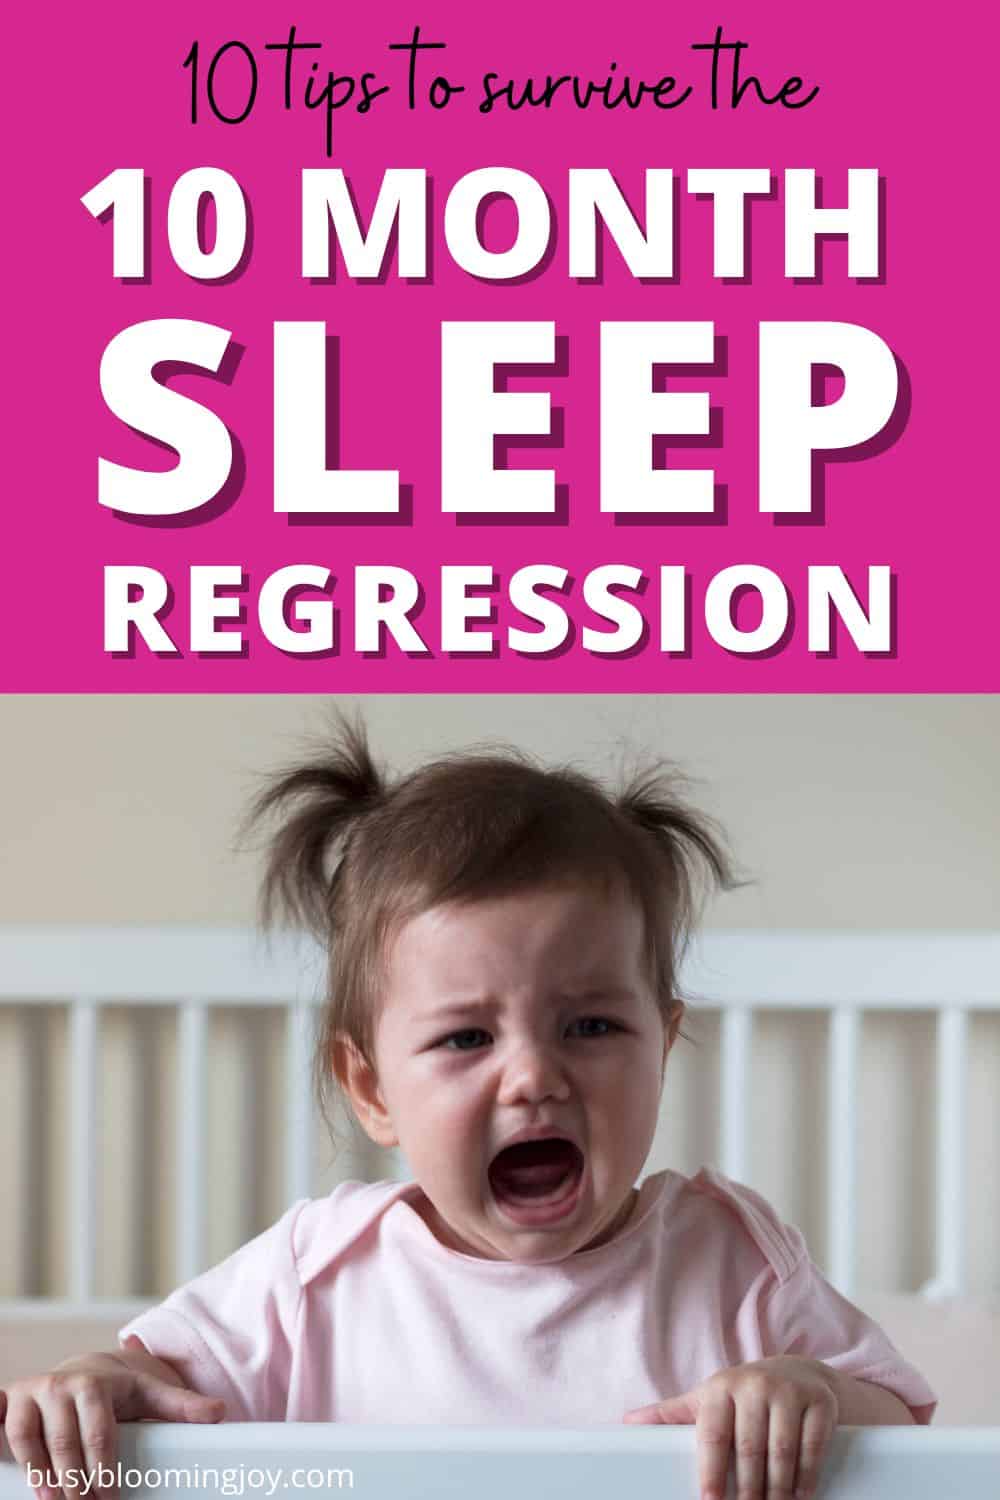 10 tips for the 10-month sleep regression to help you navigate it with minimal sleep lost